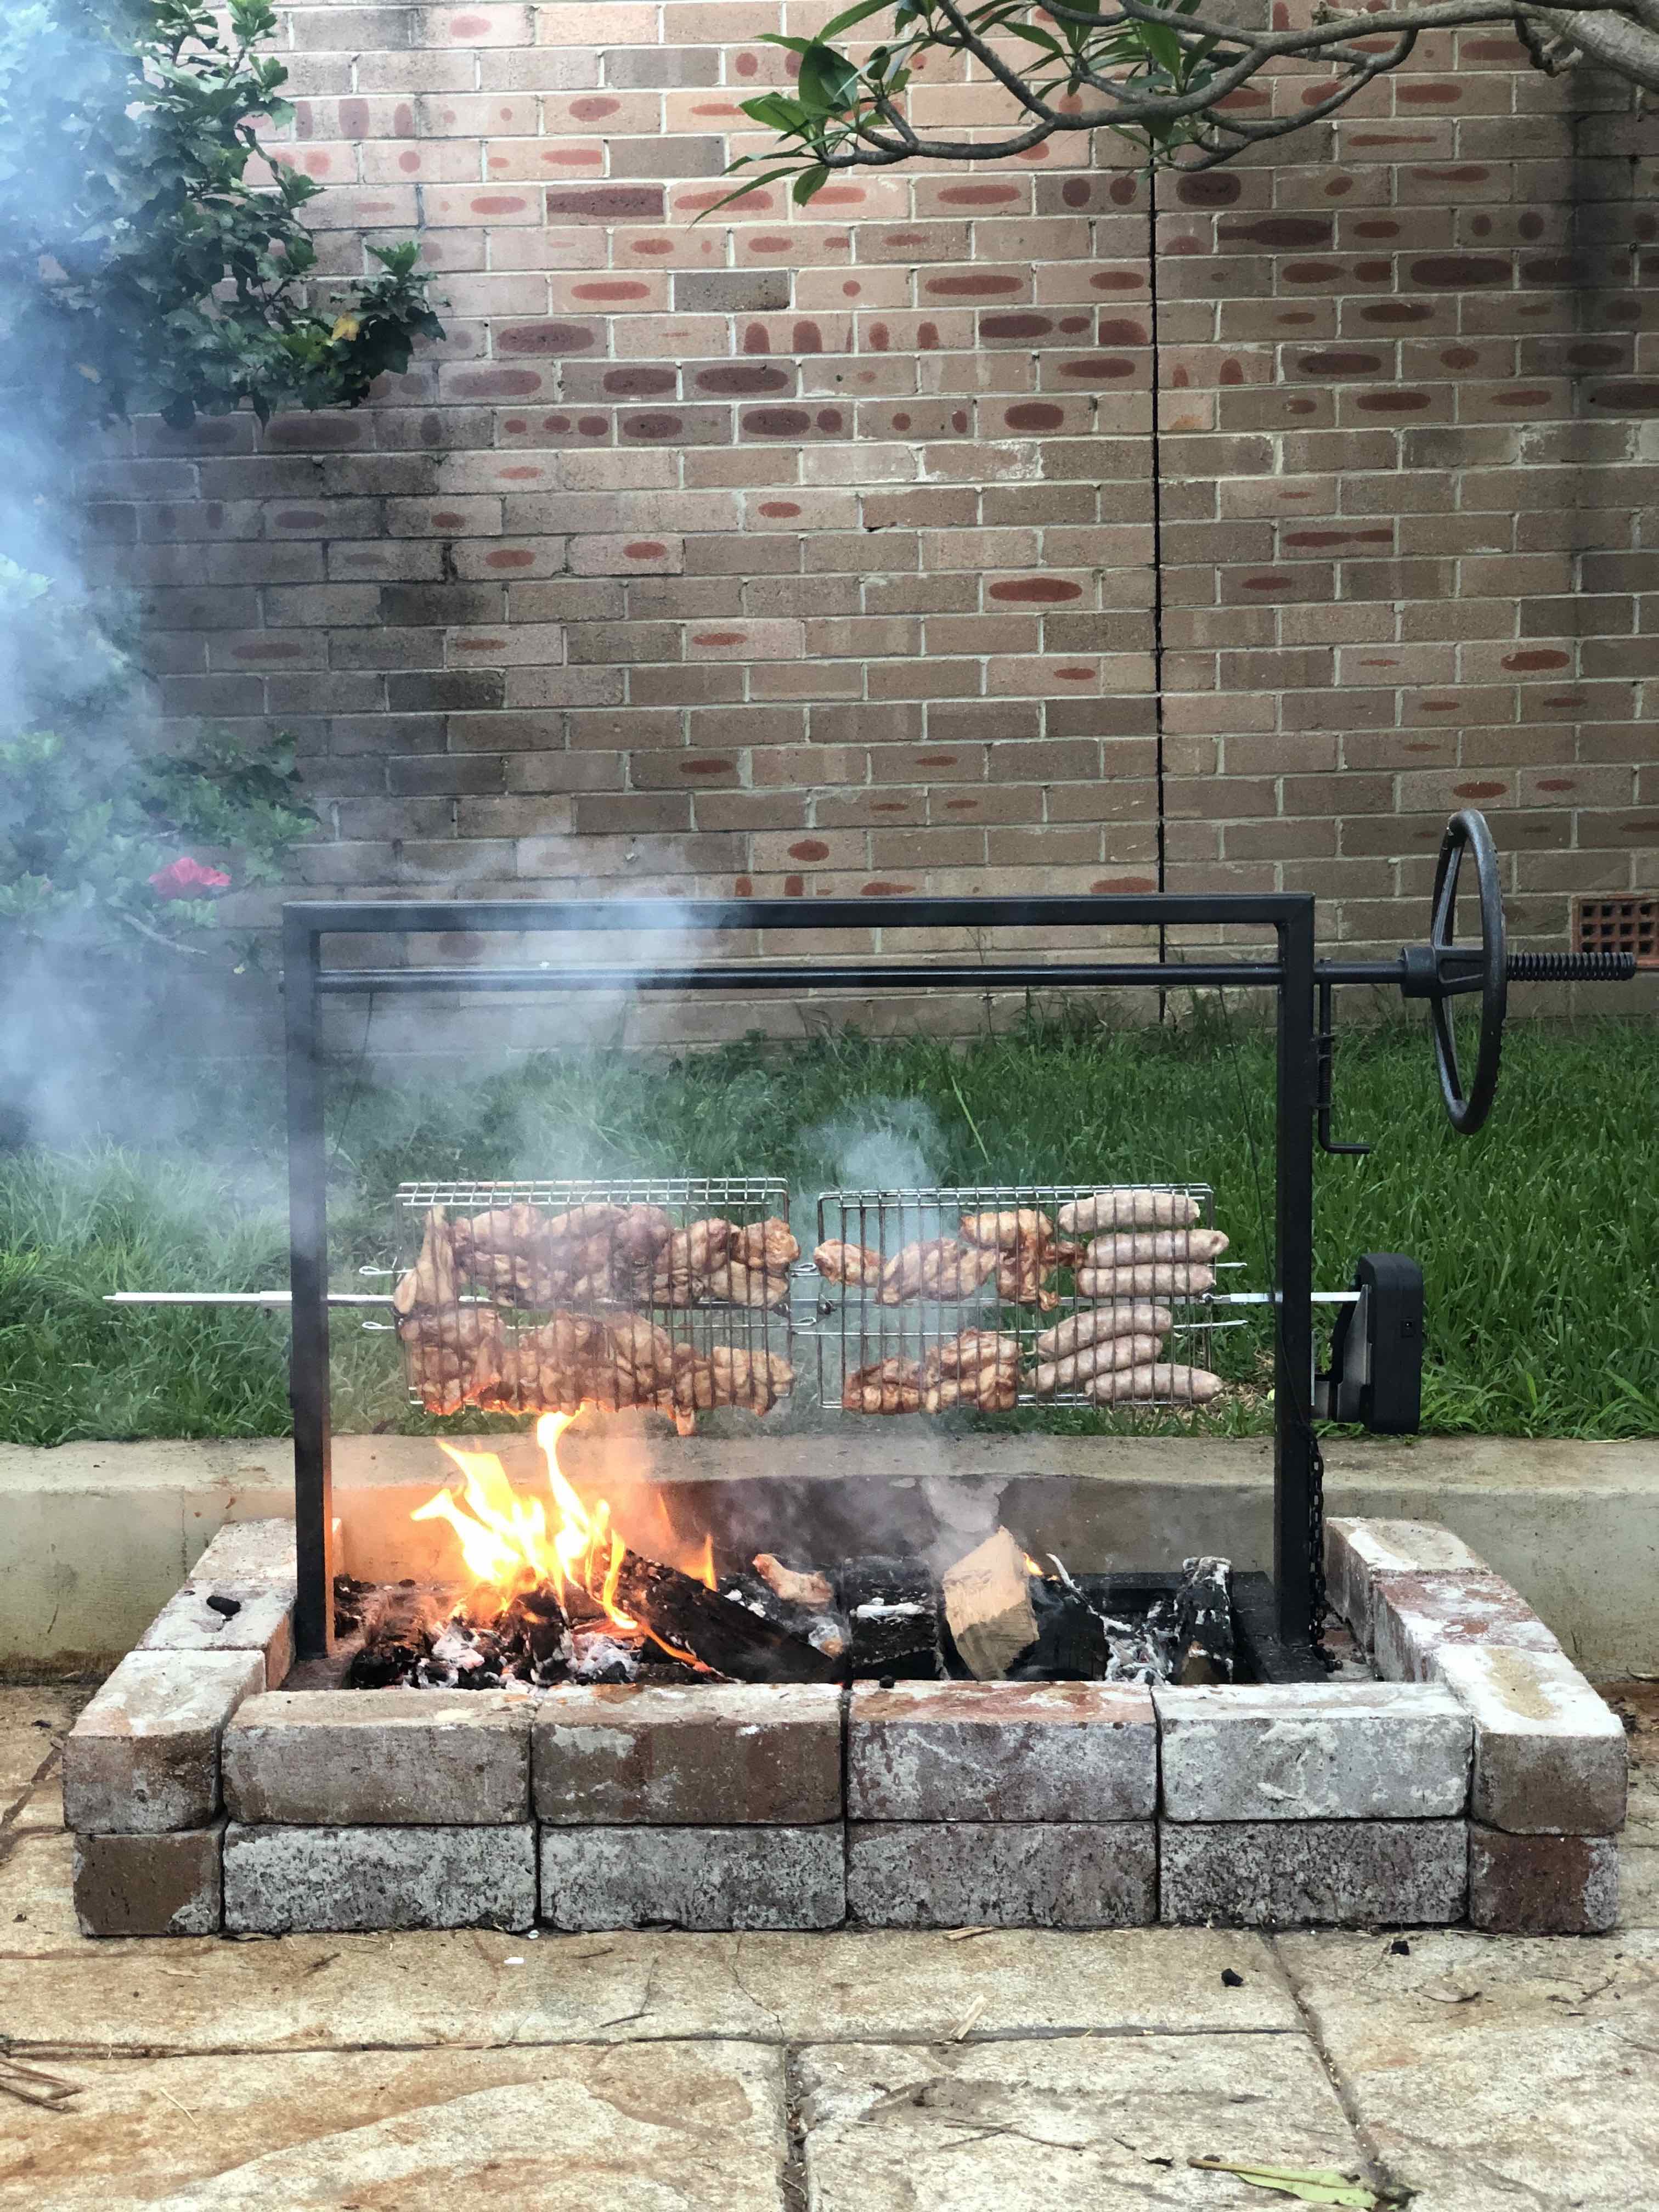 Parrilla for camping, fire pits, campfires: perfect for holidays or backyards - Australia